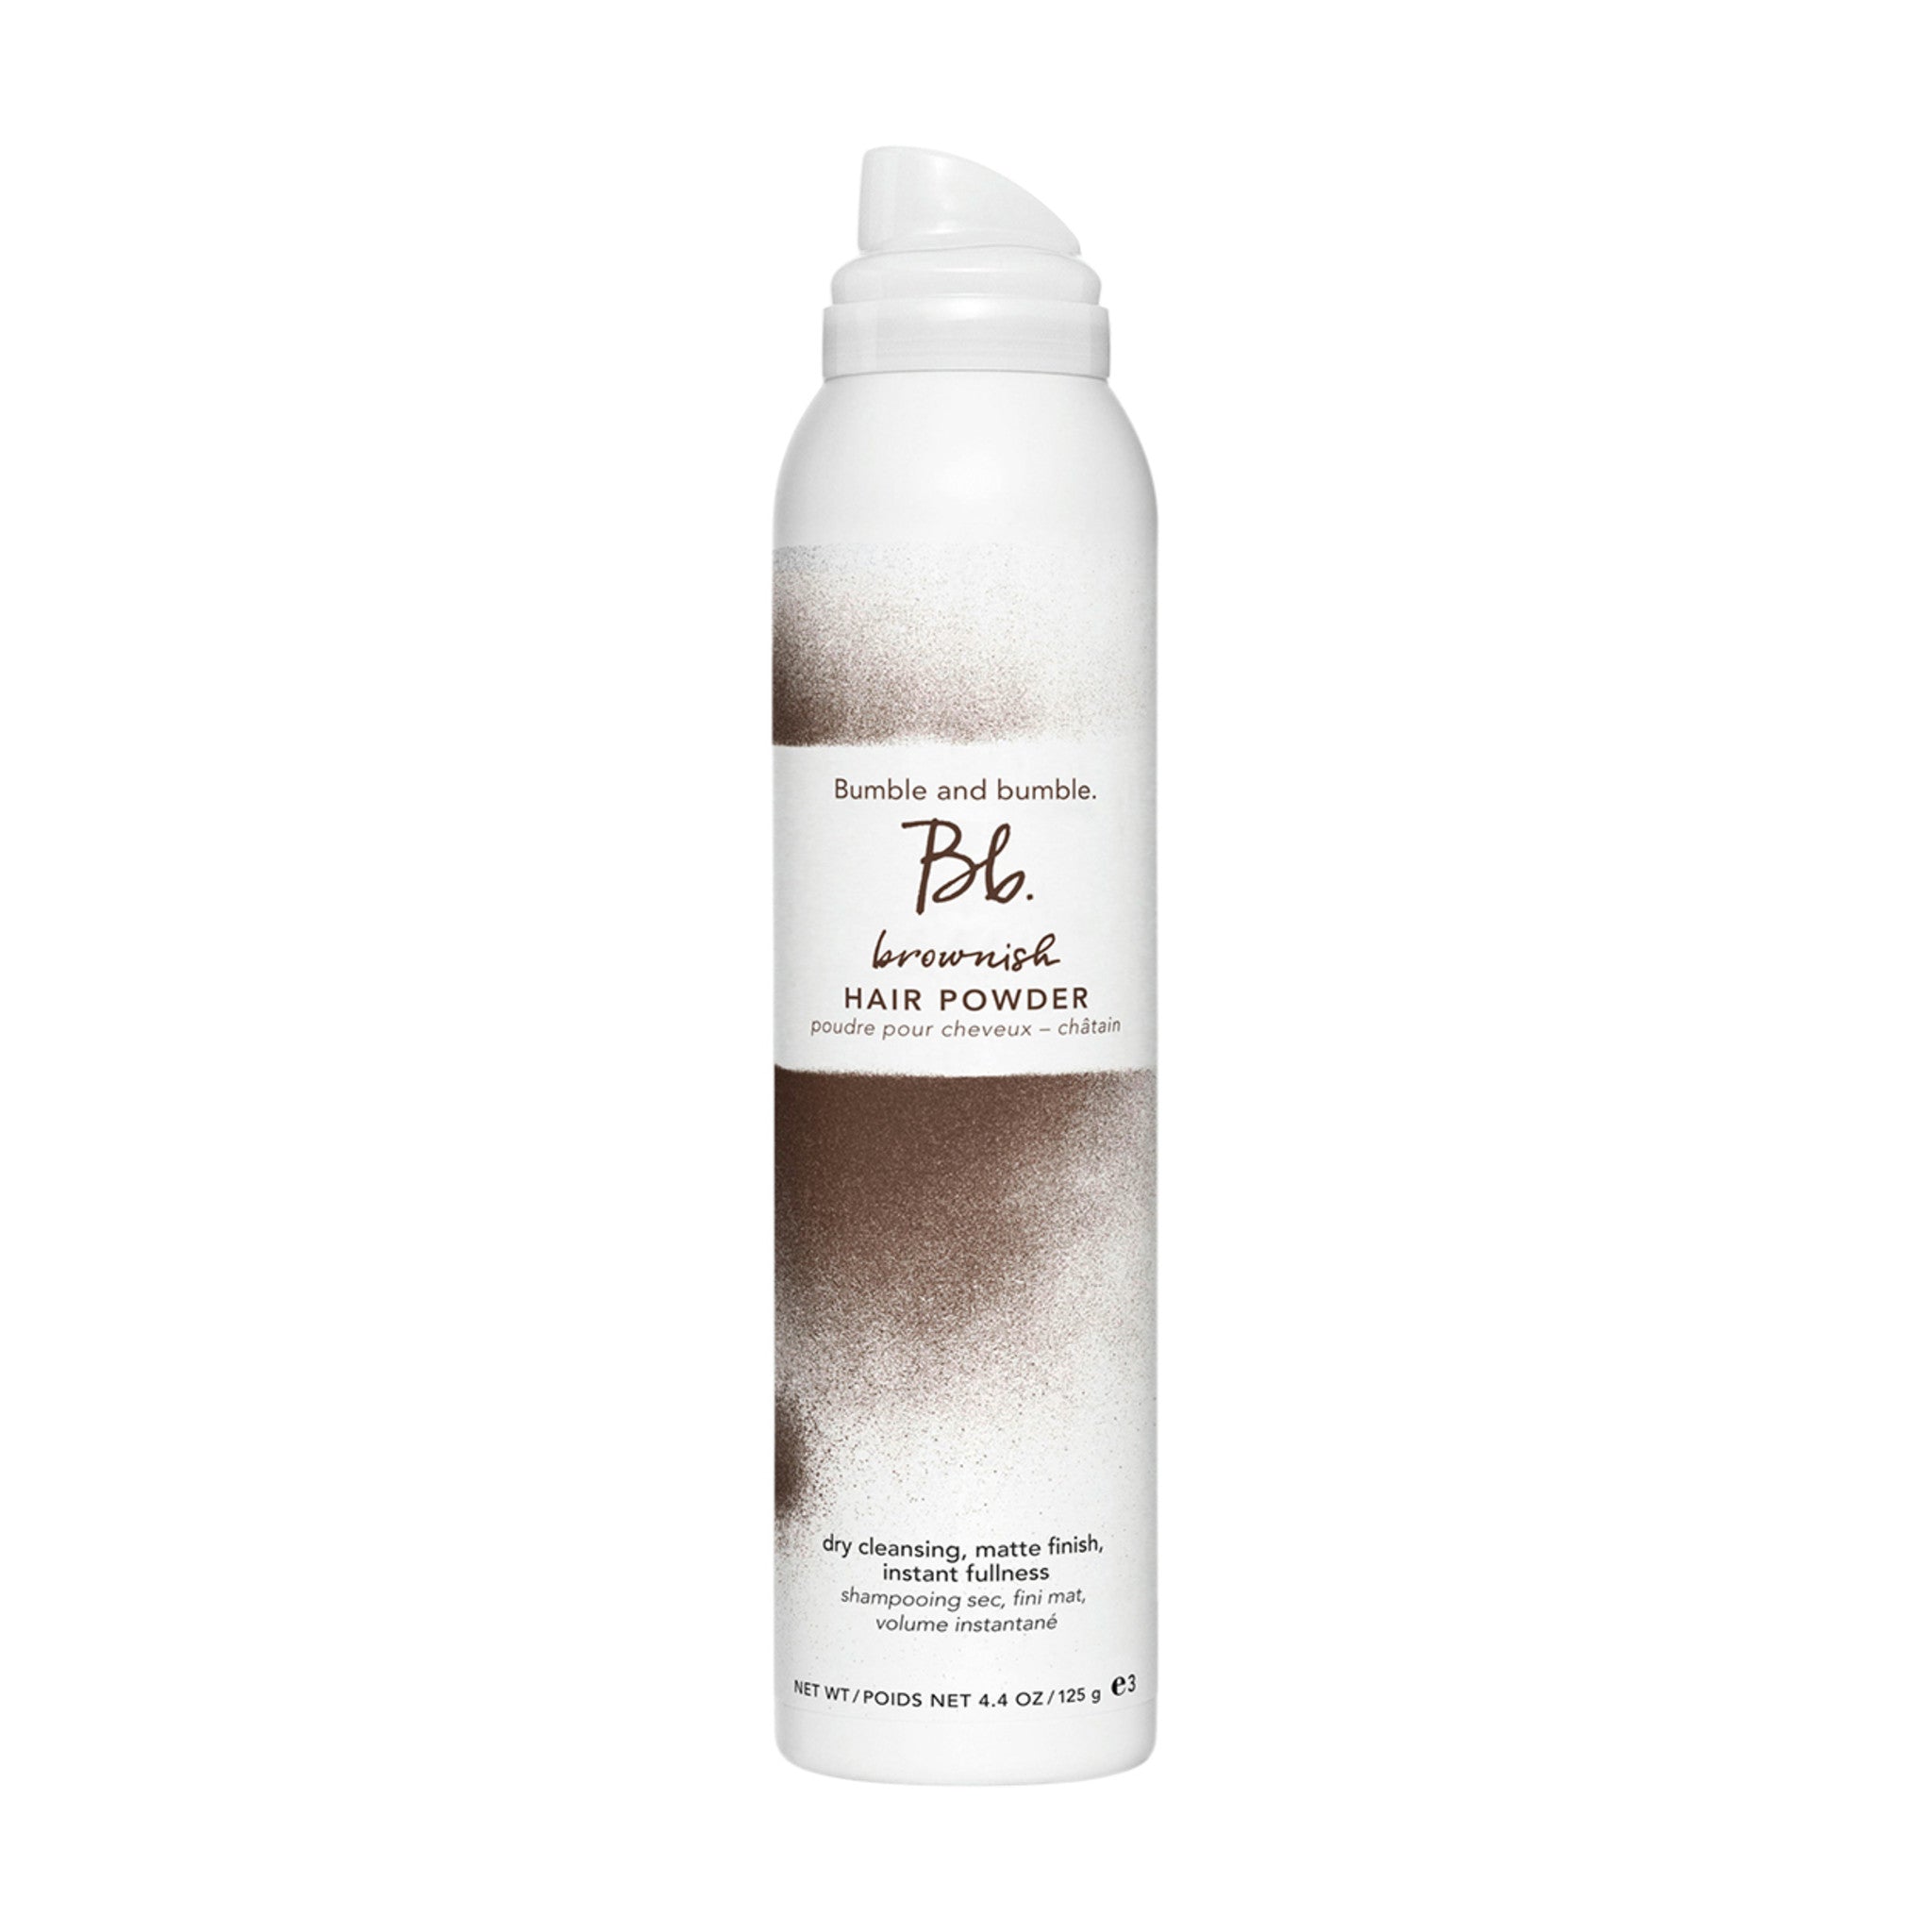 Bumble and Bumble Brownish Hair Powder main image. This product is for gray hair